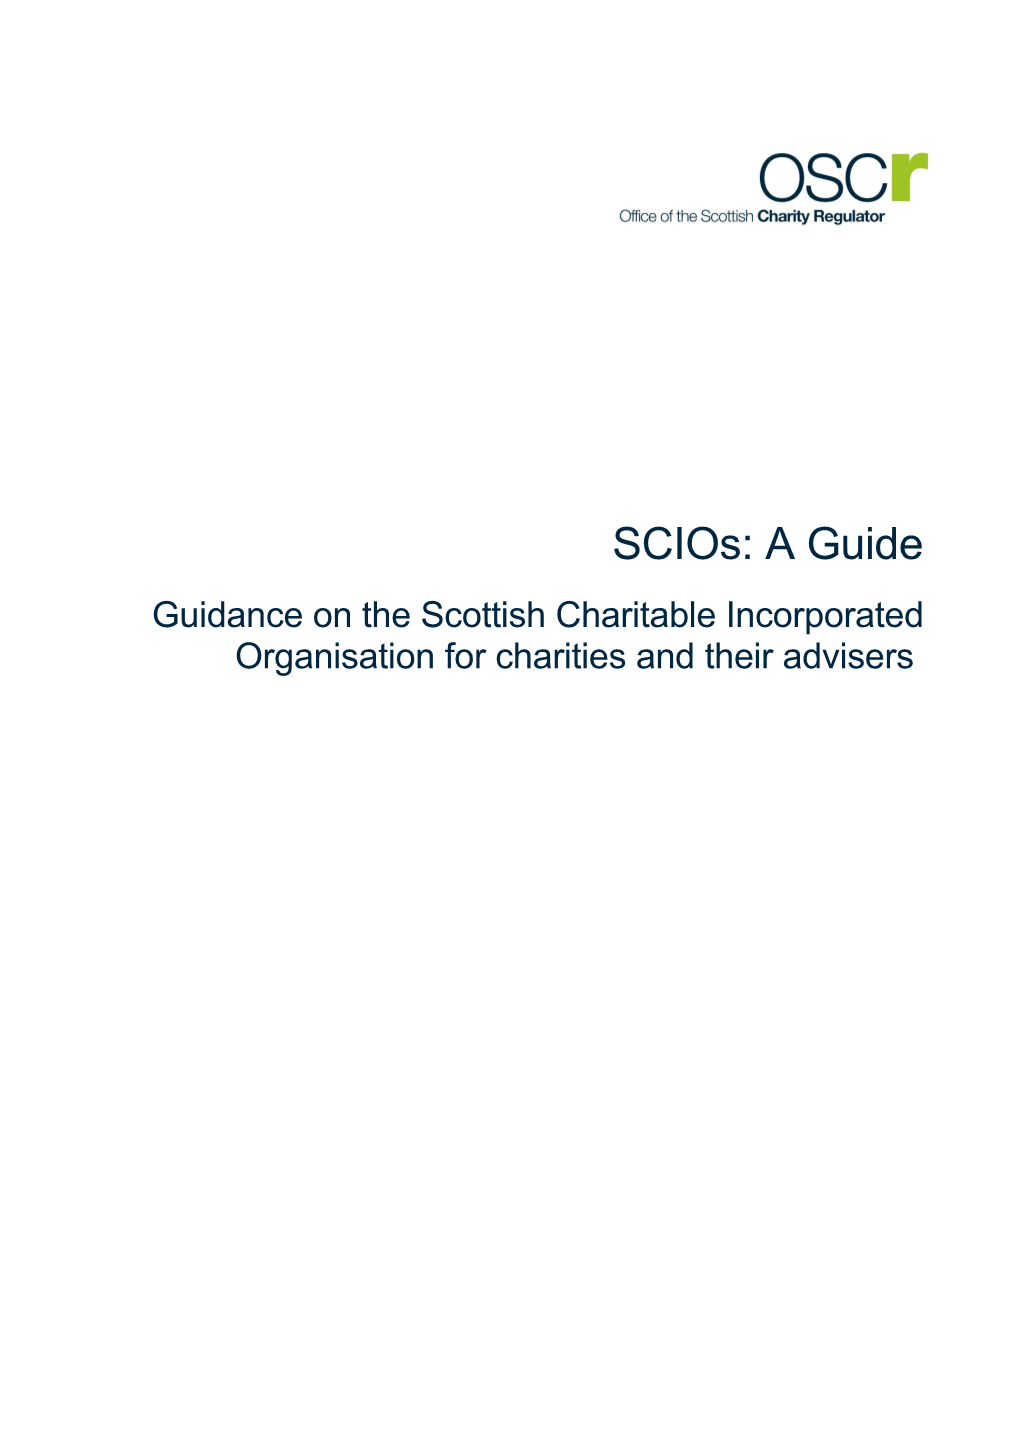 Guidance on the Scottish Charitable Incorporated Organisation for Charities and Their Advisers